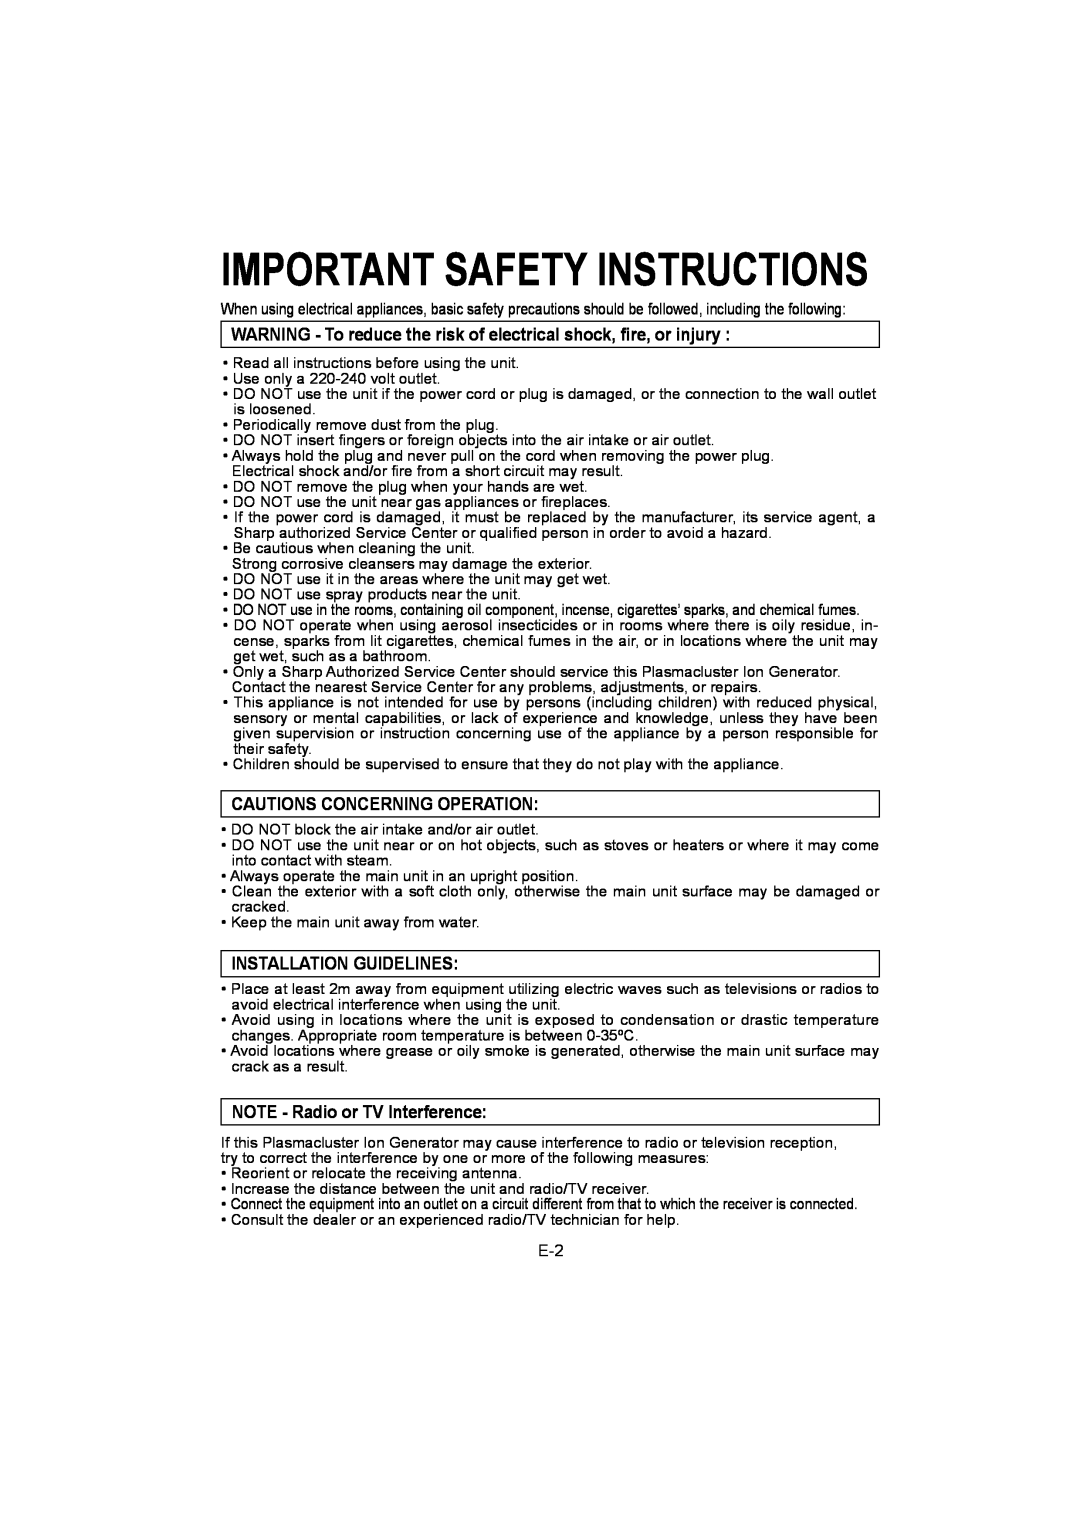 Sharp IG-A10E operation manual Important Safety Instructions, Cautions Concerning Operation, Installation Guidelines 